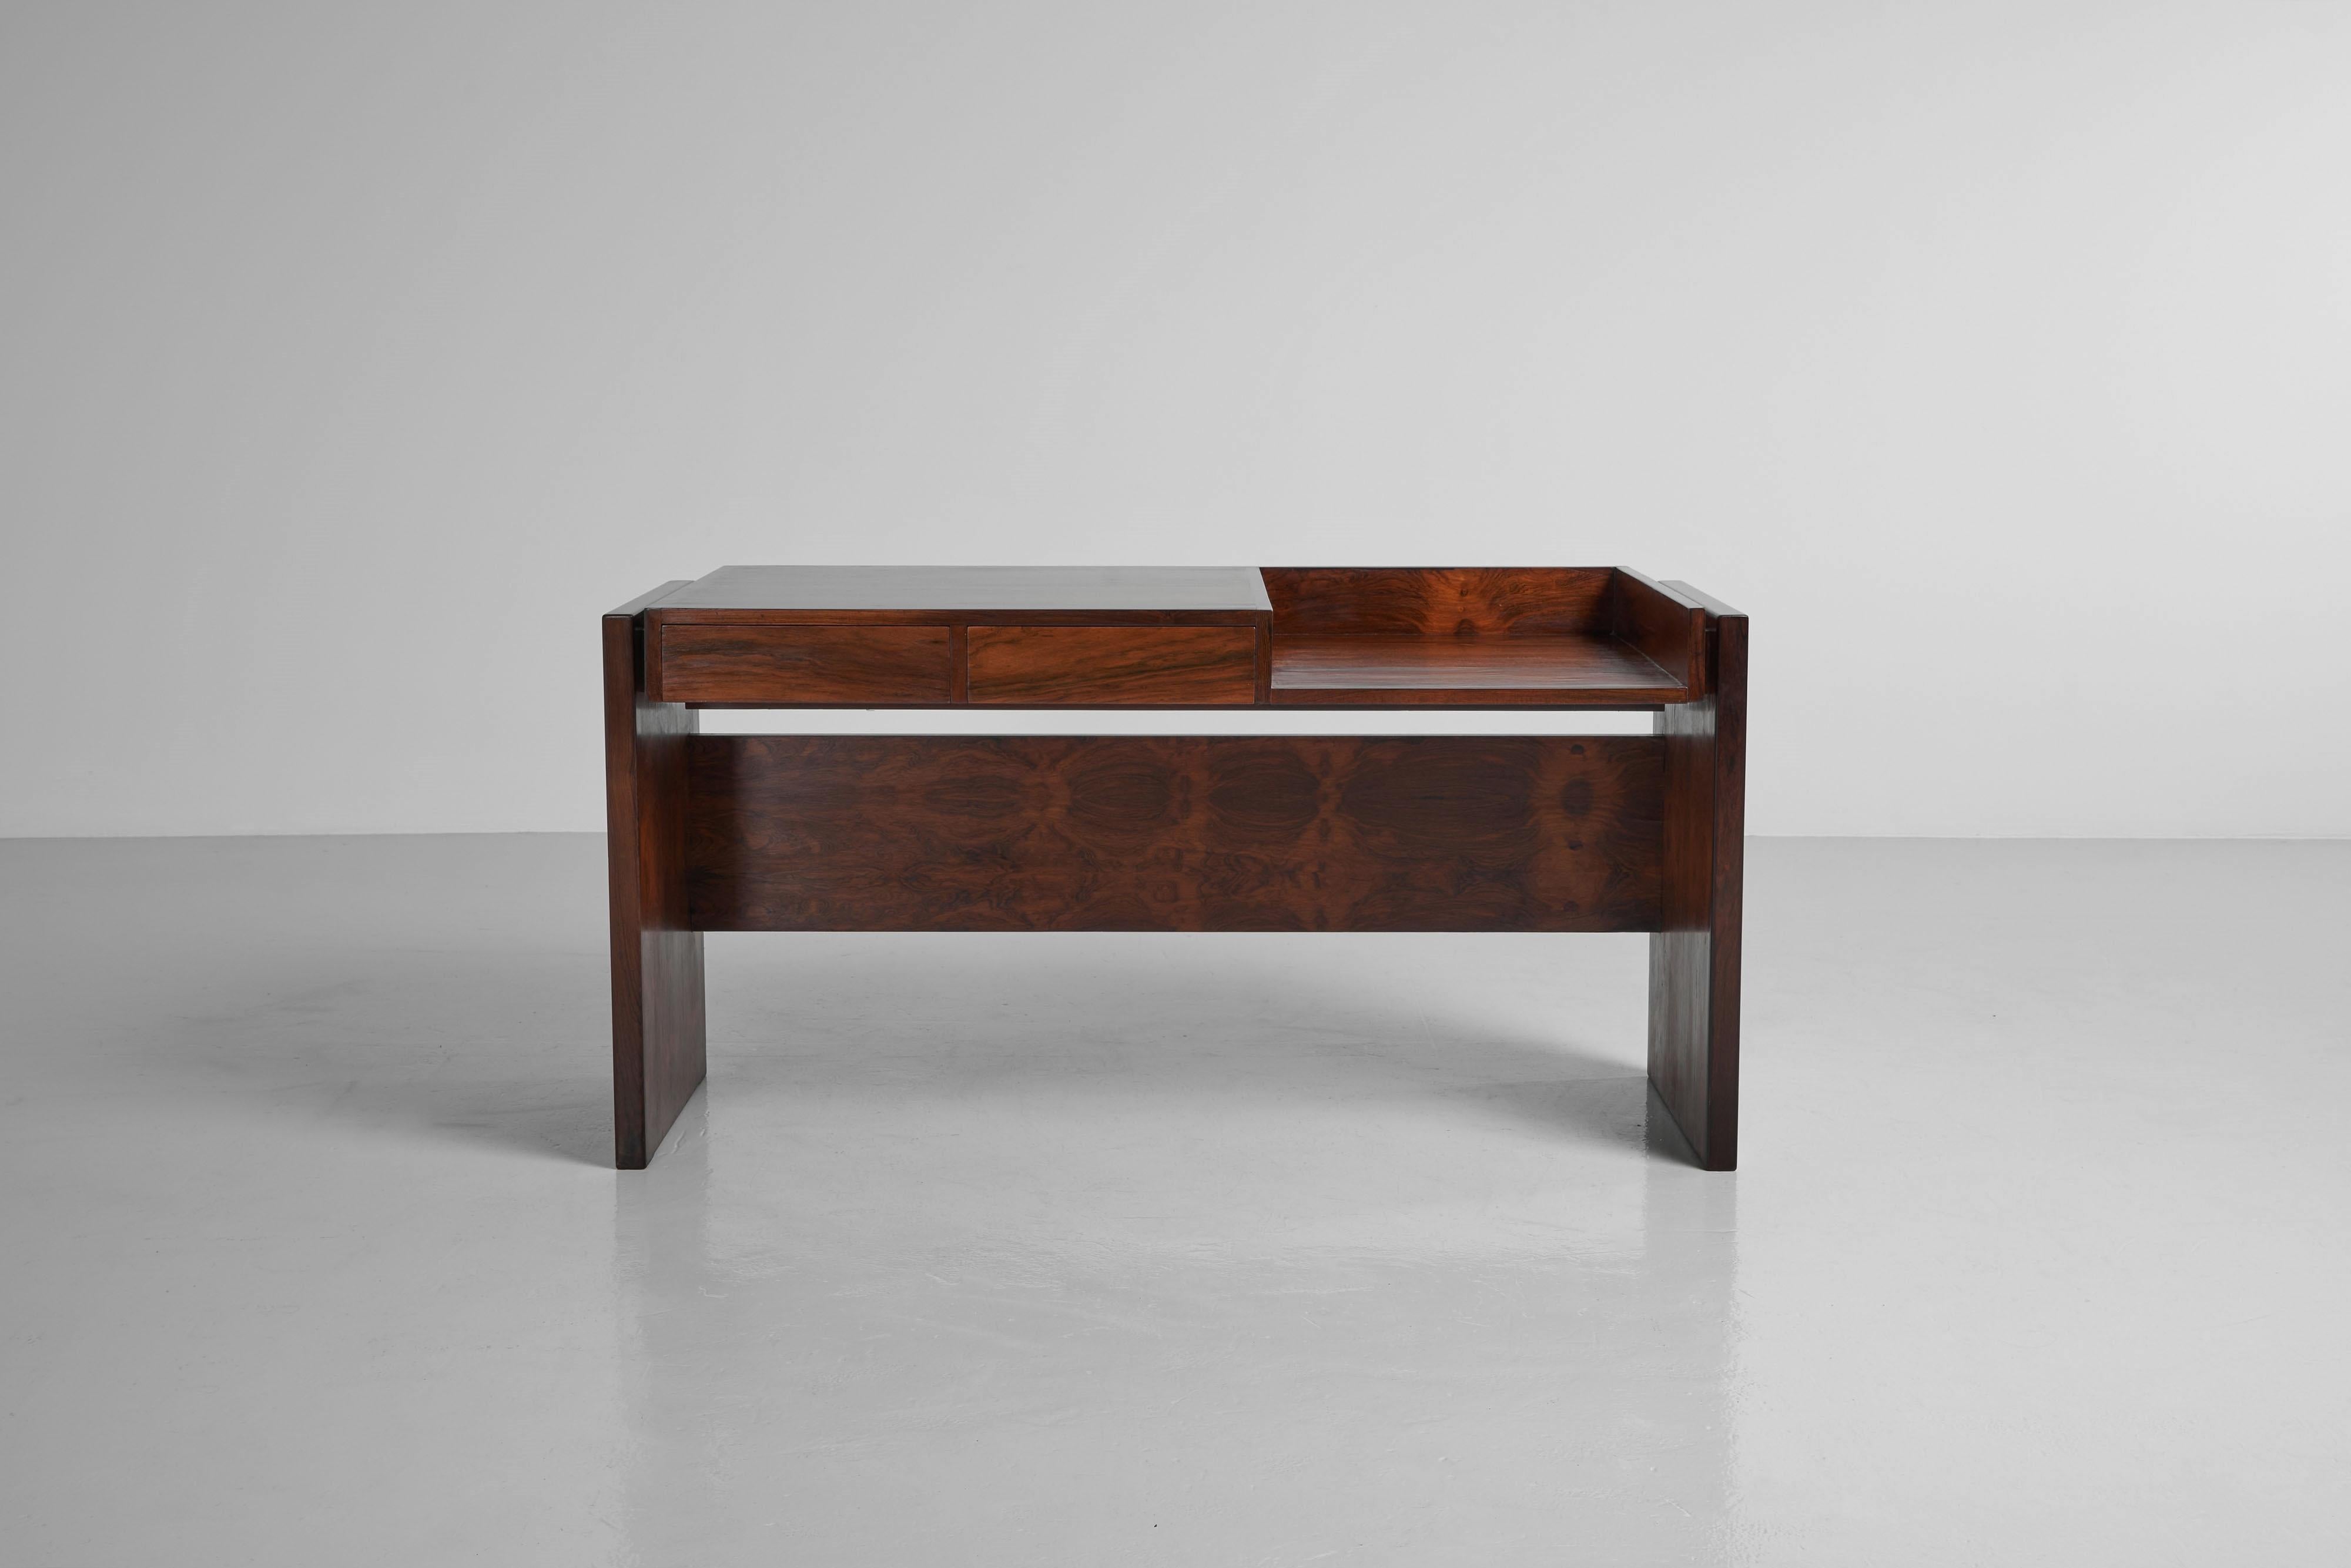 Beautiful Bloch writing desk designed by Joaquim Tenreiro and manufactured in Brazil 1965. This desk was once used in the BLOCH EDITORES S.A. BUILDING, a well-known Brazilian publisher that operated from 1952 to 2000. Tenreiro himself furnished the